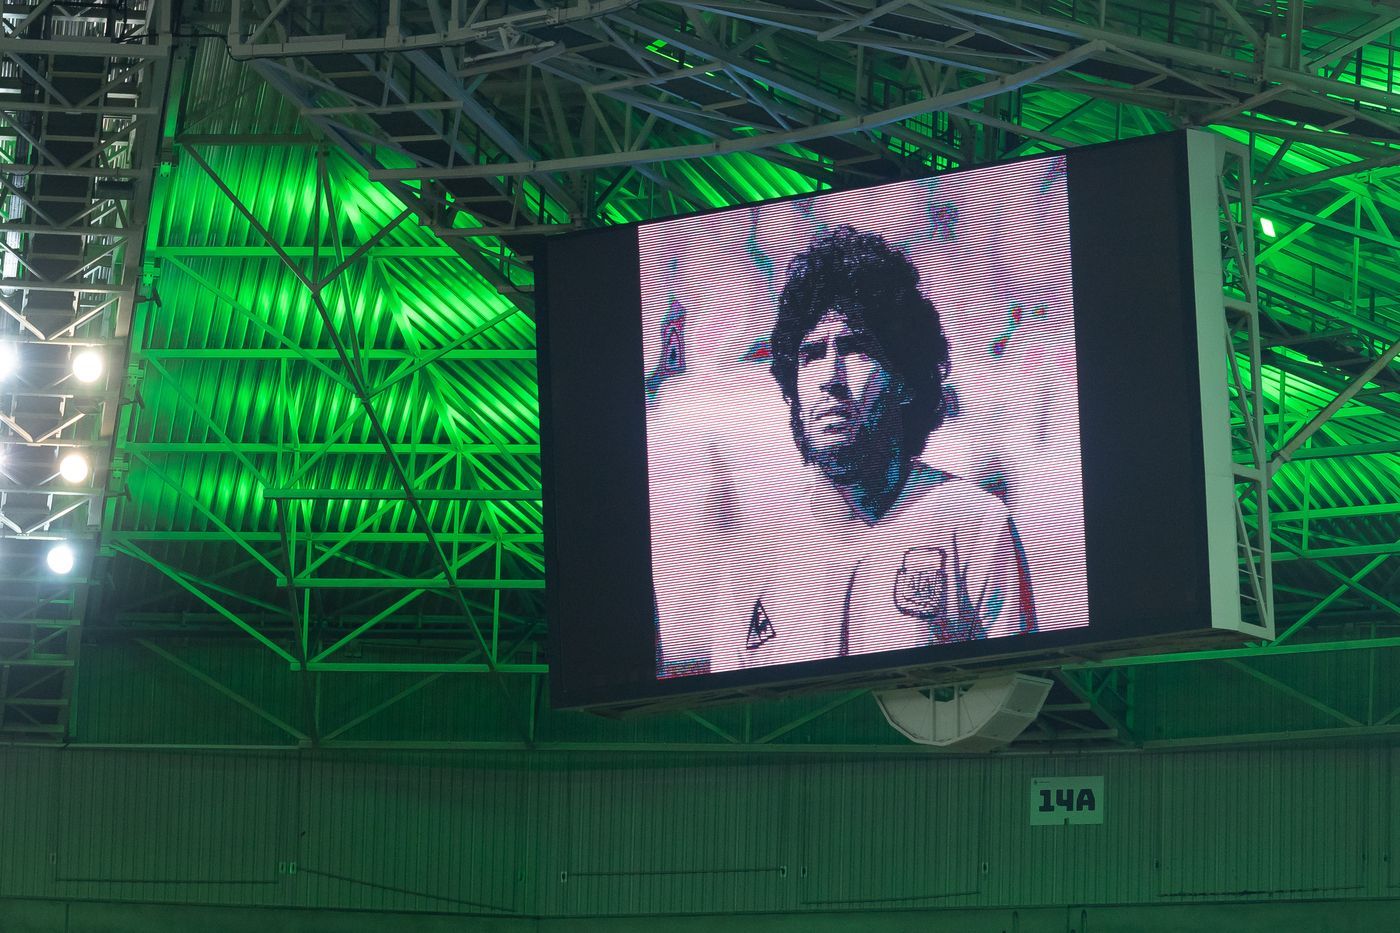 TFCLive reacts to the death of Argentine soccer legend Diego Maradona